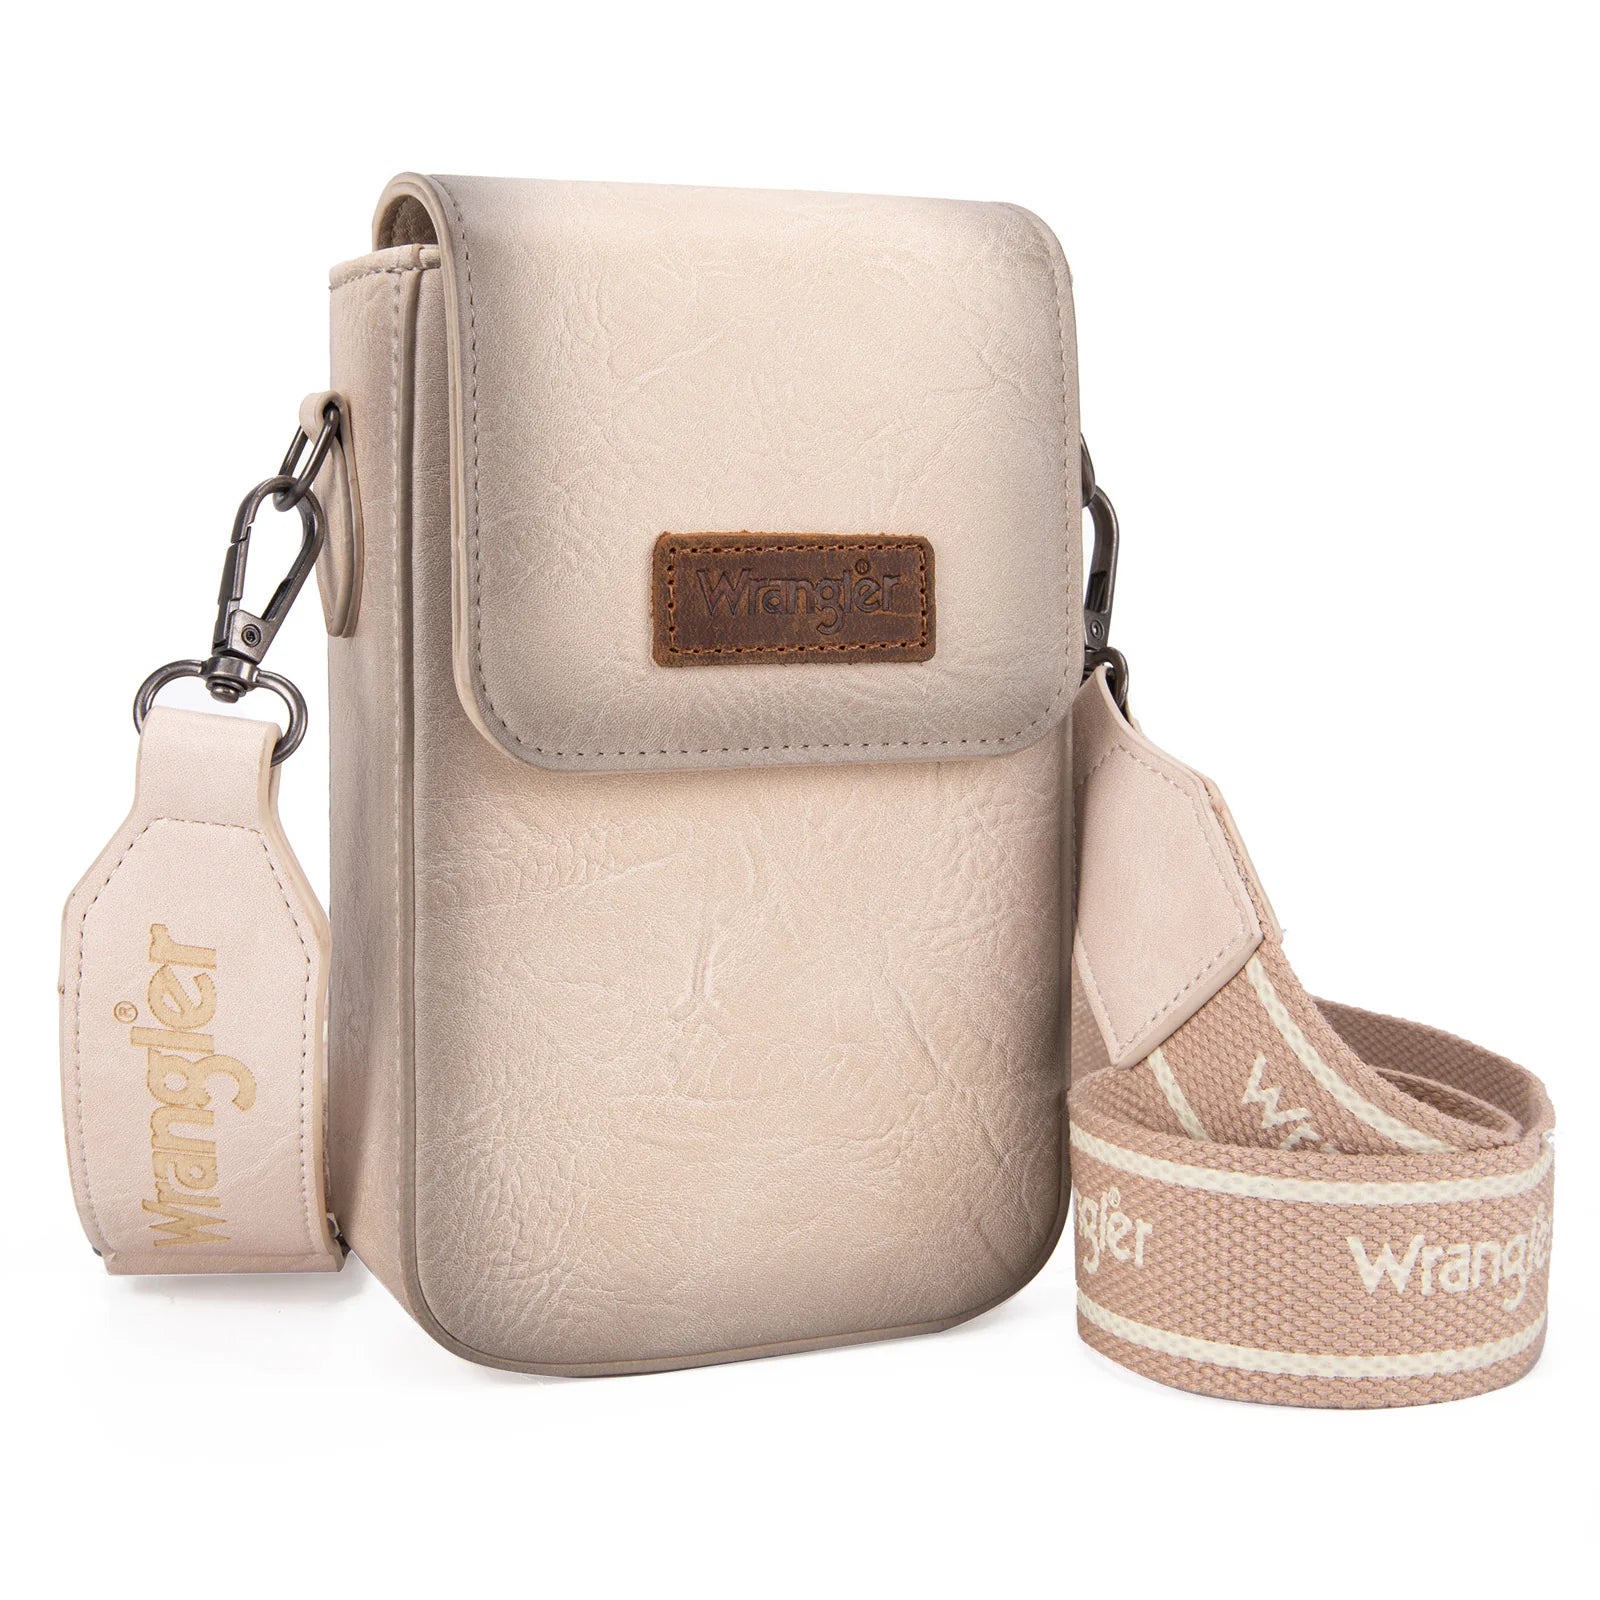 Wrangler Crossbody Cell Phone Purse With Back Card Slots